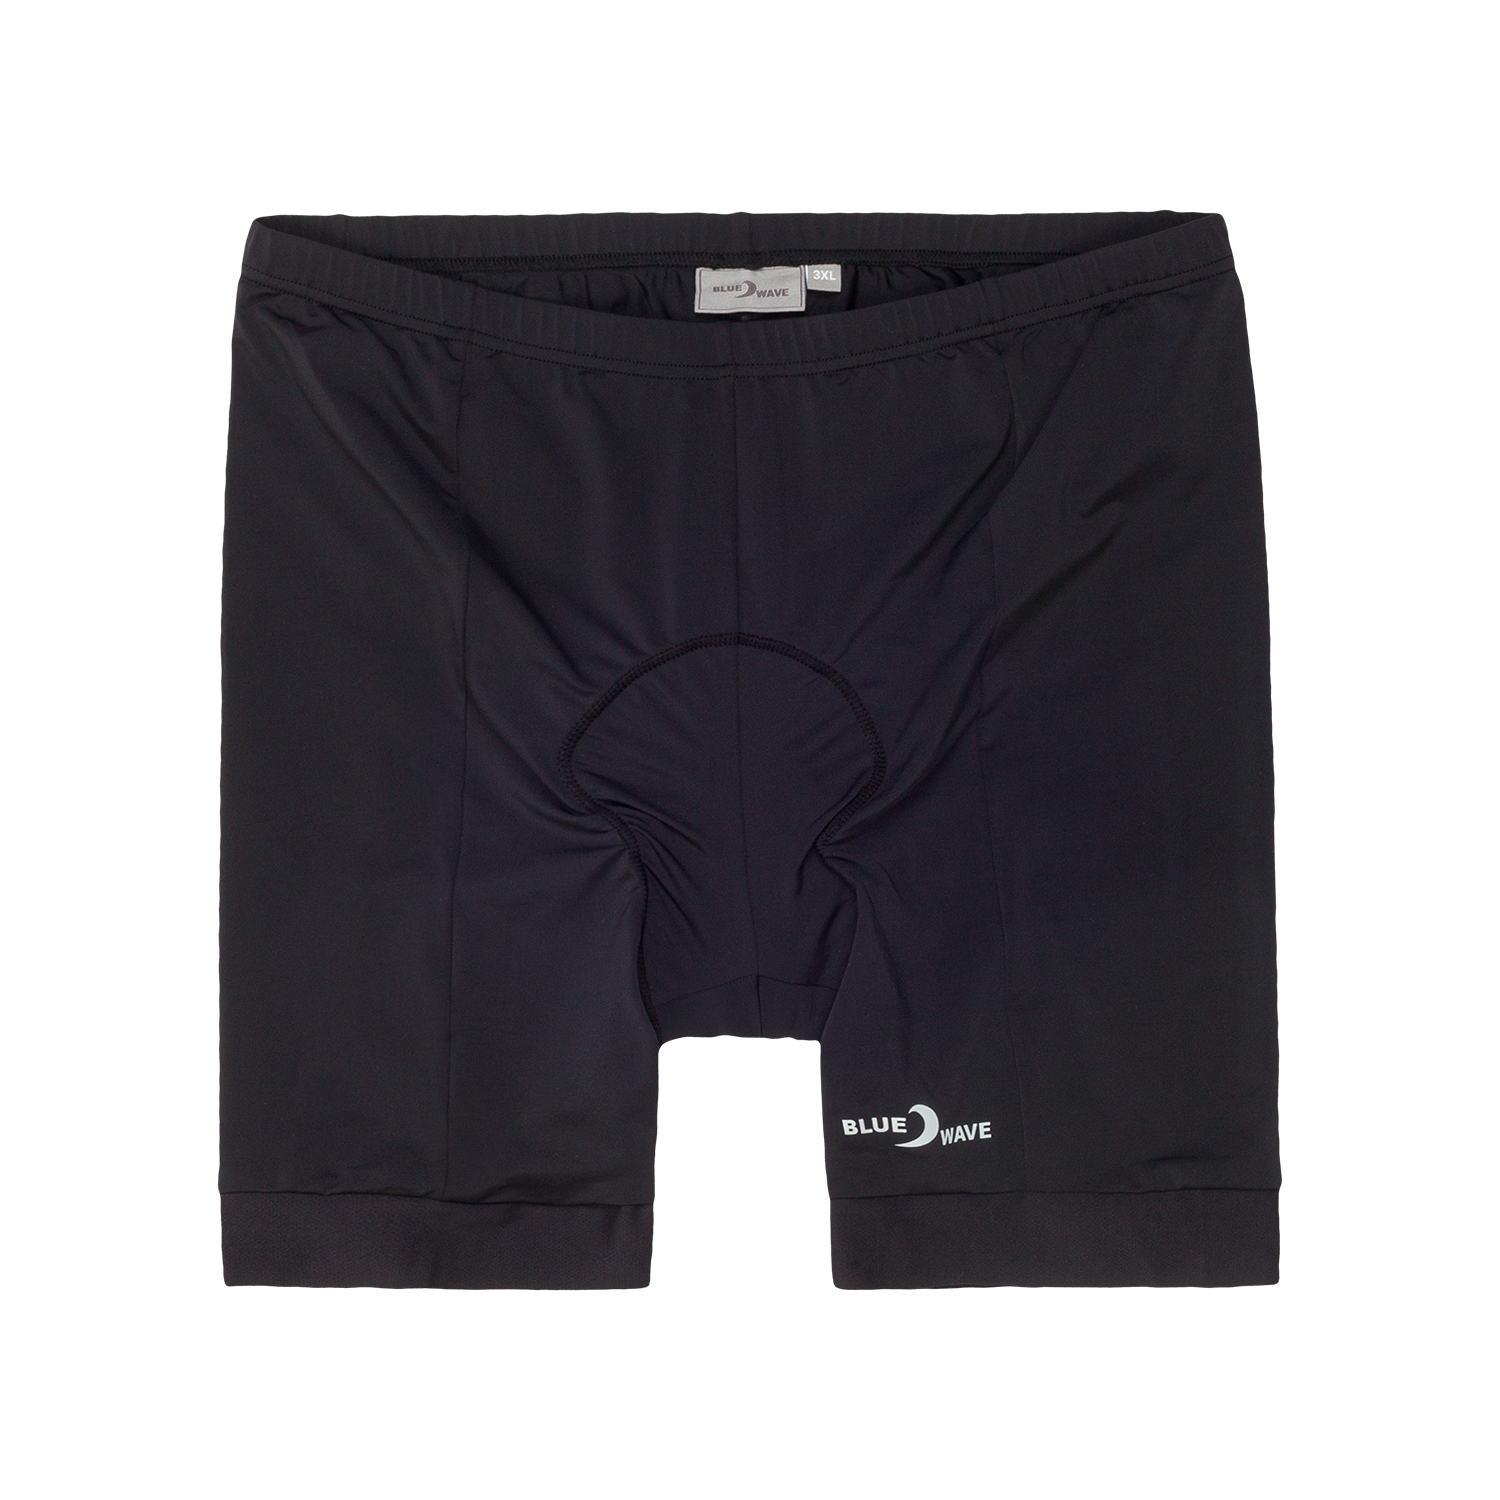 Bike shorts "André" in black by Blue Wave for men up to oversize 8XL